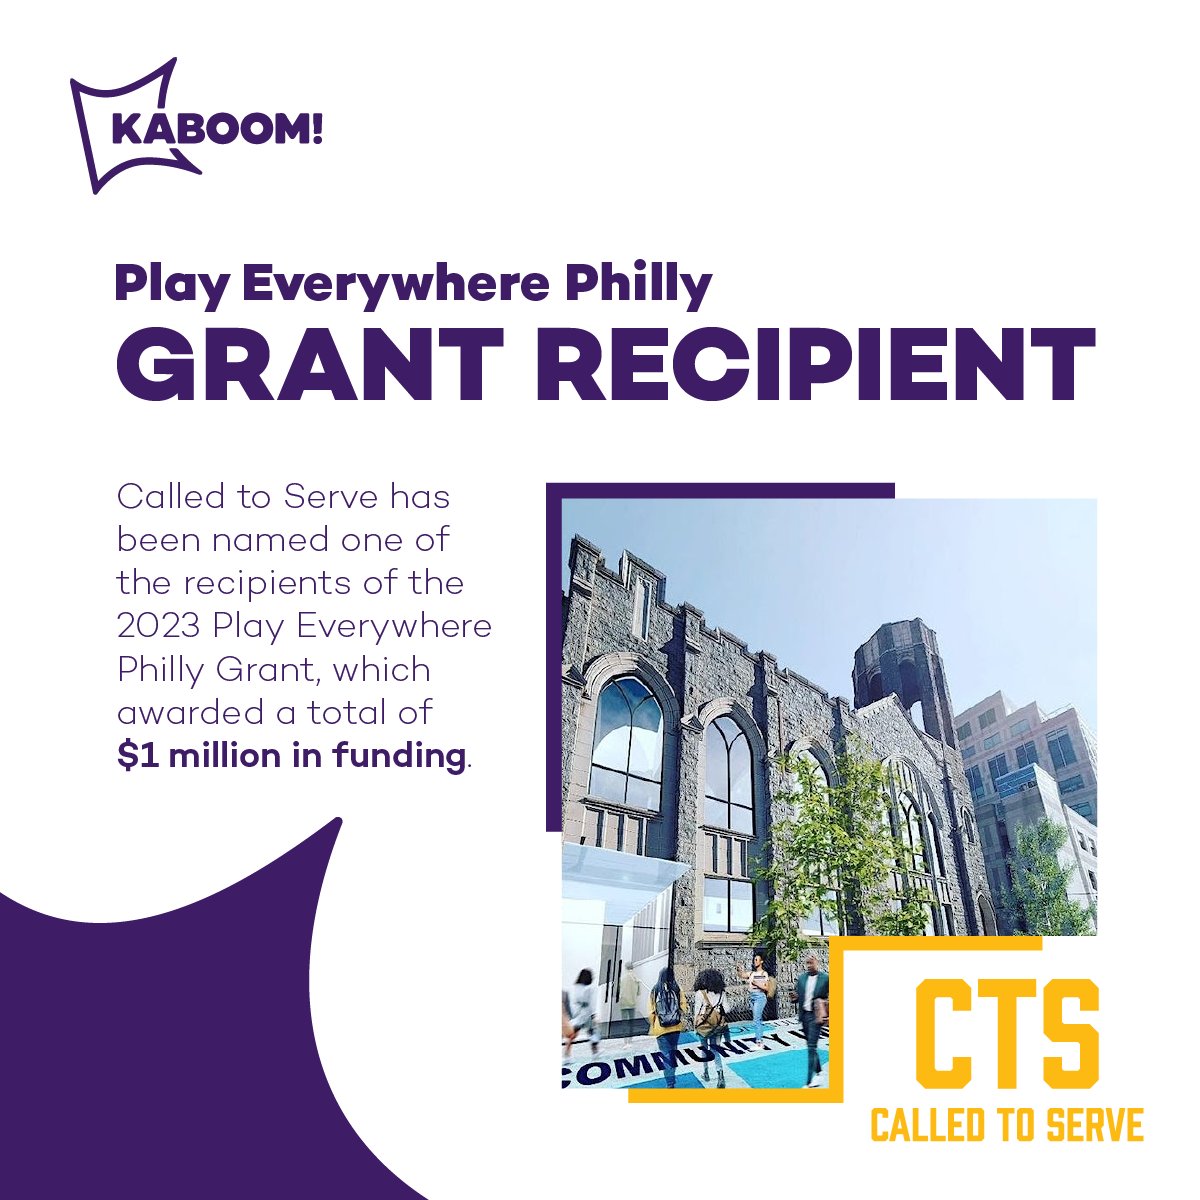 We're excited to announce we have been named one of the recipients of the 2023 Play Everywhere Philly Grant! This grant has awarded a total of $1 million in funding and will go toward Immersive Playful Learning Installations at the future Sullivan Community Impact Center.